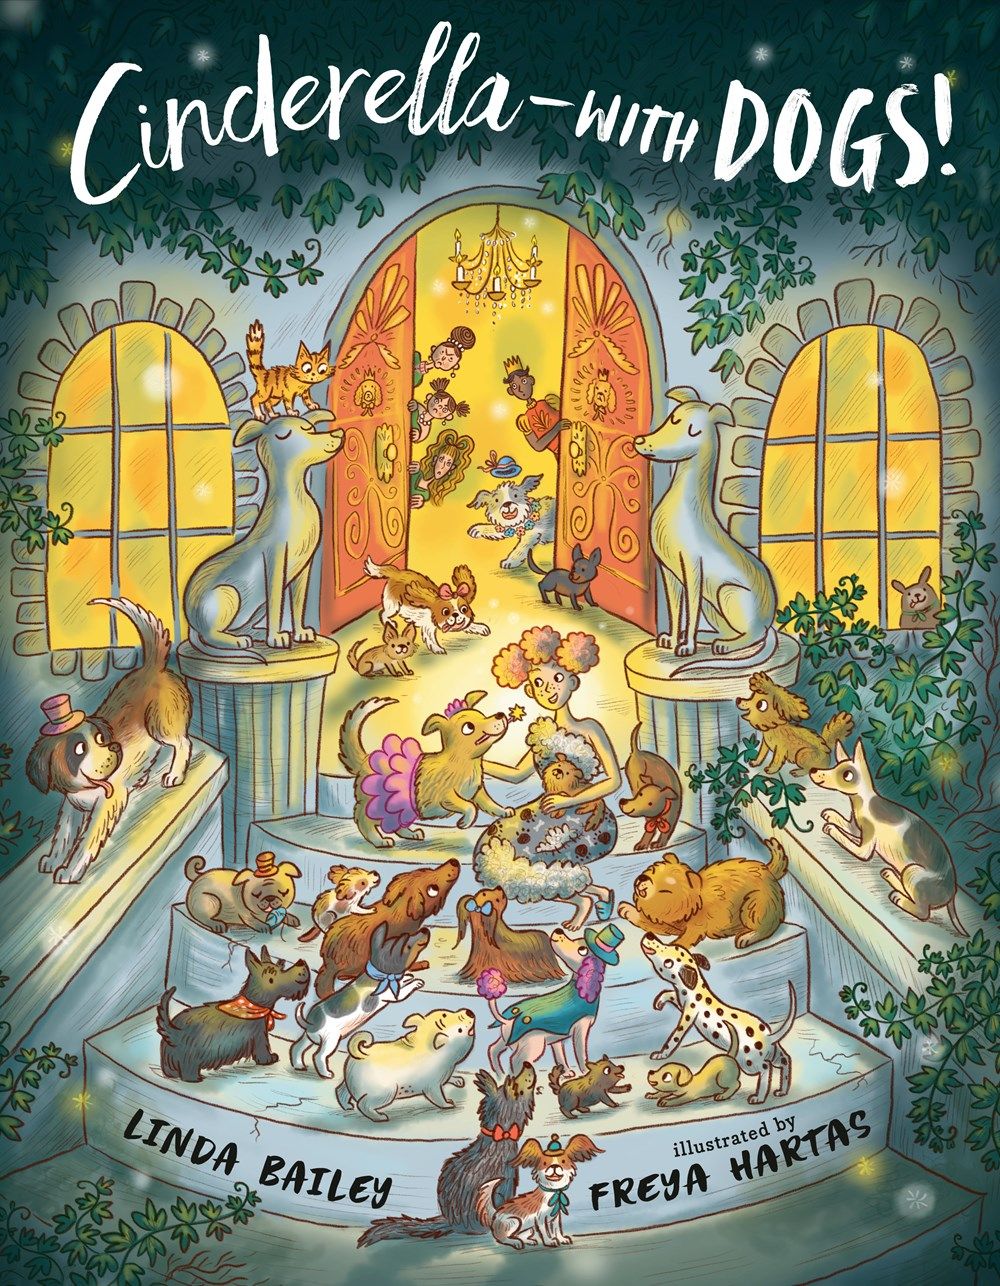 Cover of Cinderella--with Dogs! by Bailey